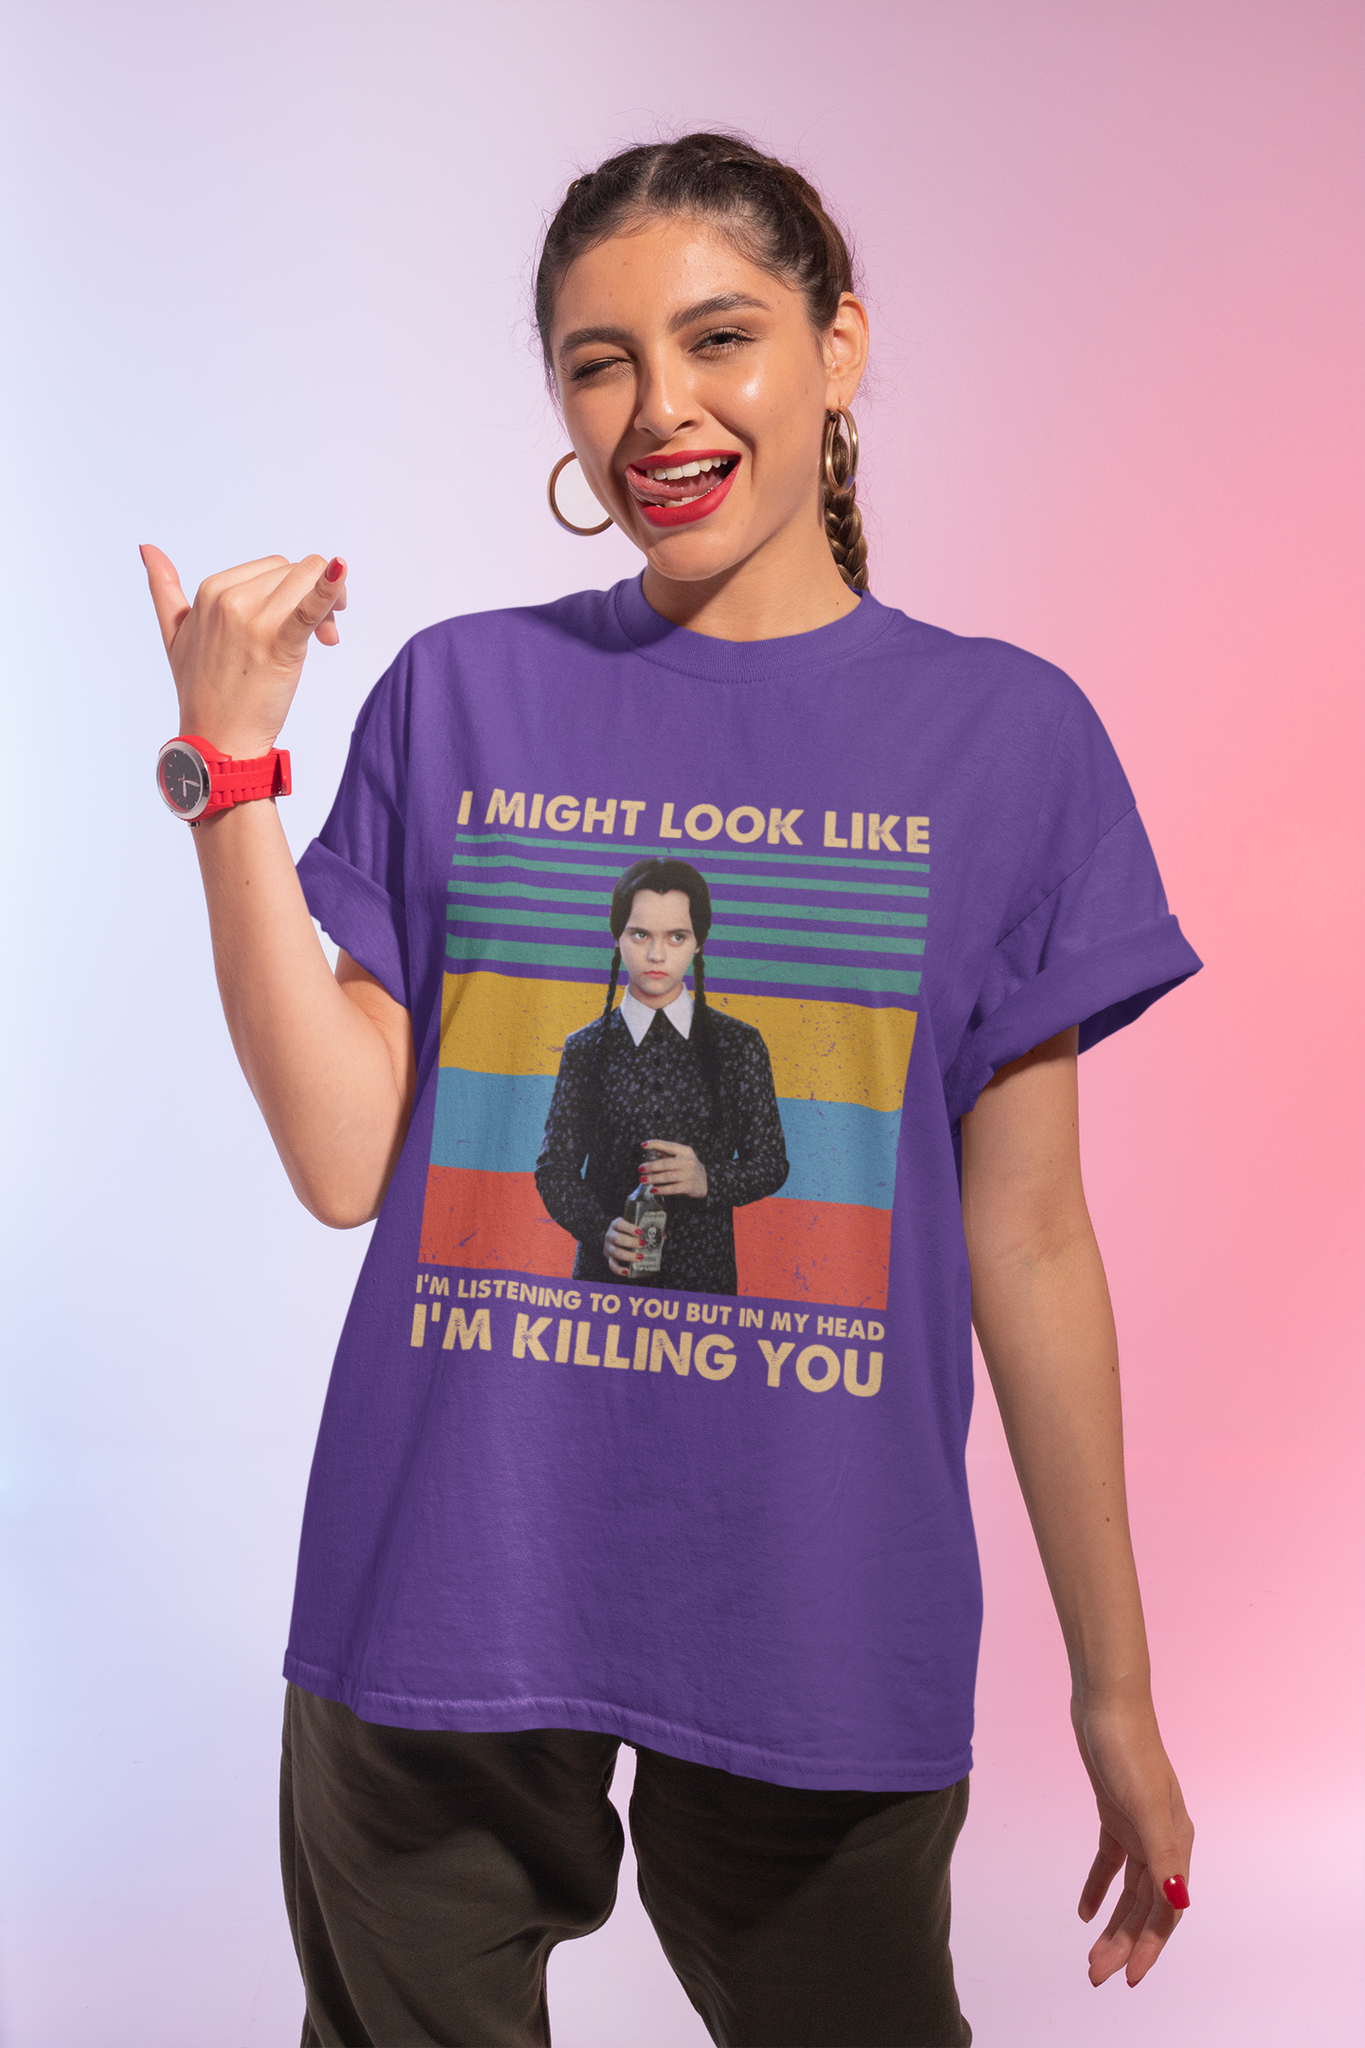 Addams Family Vintage T Shirt, Wednesday Addams Tshirt, I Might Look Like Im Listening To You Shirt, Halloween Gifts